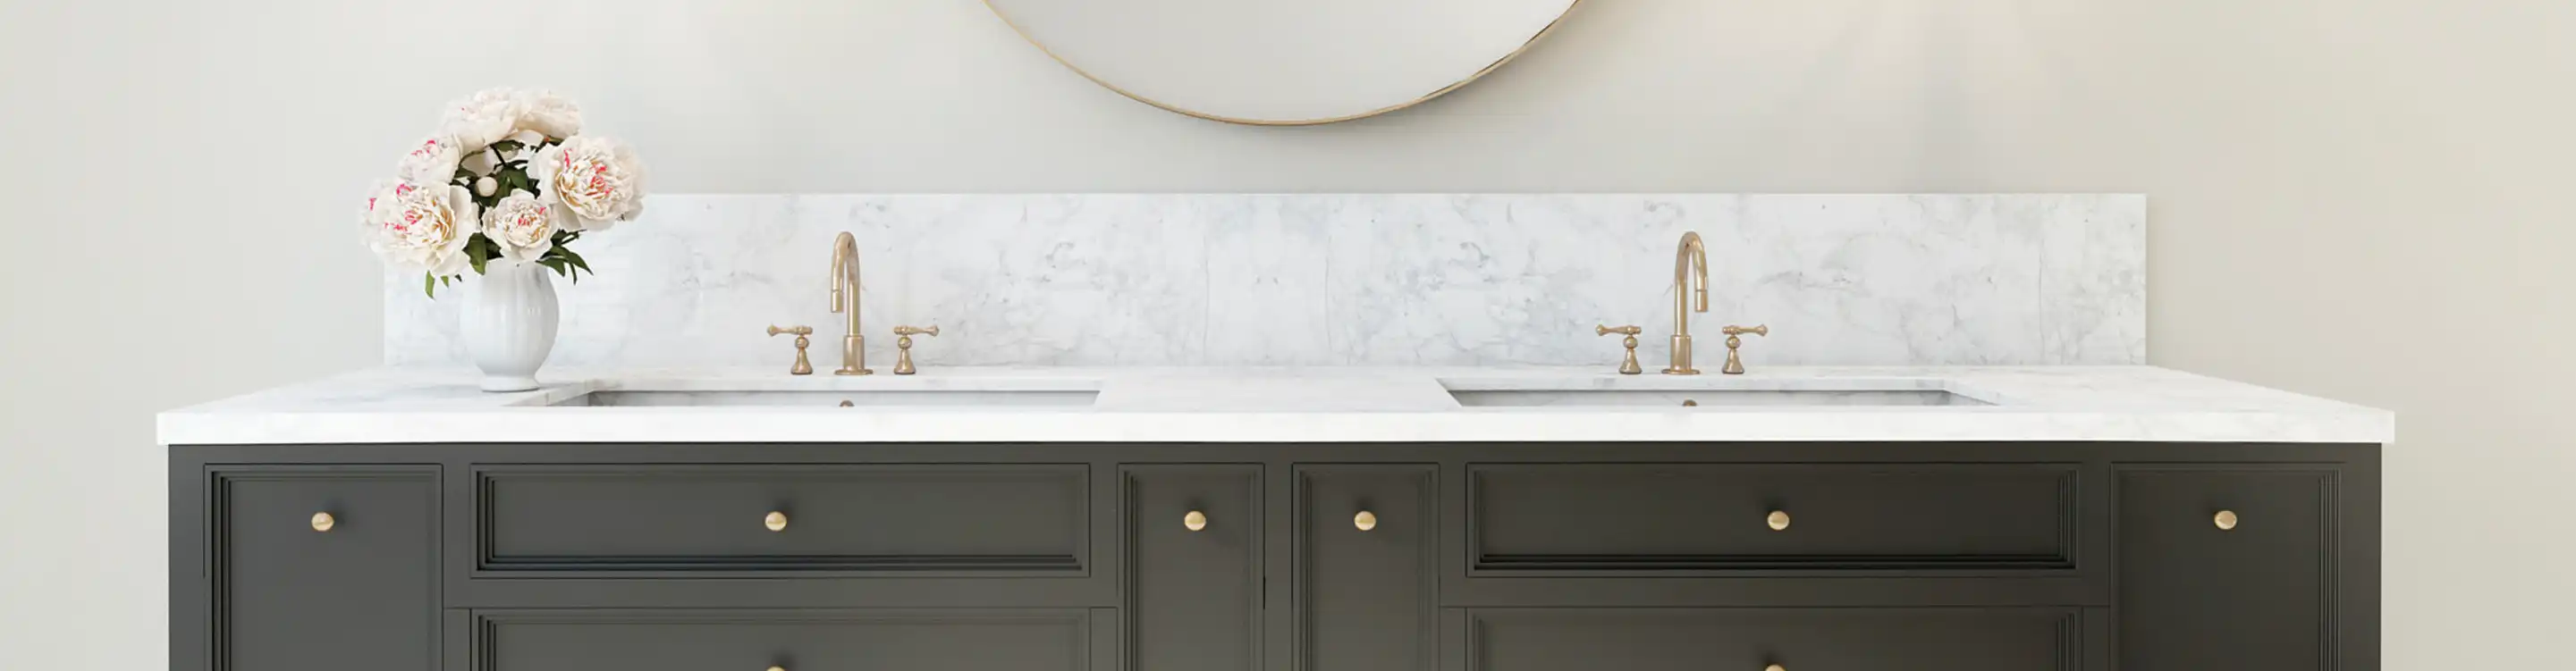 Bathroom White Marble Countertop with Sink and Gold Hardware.